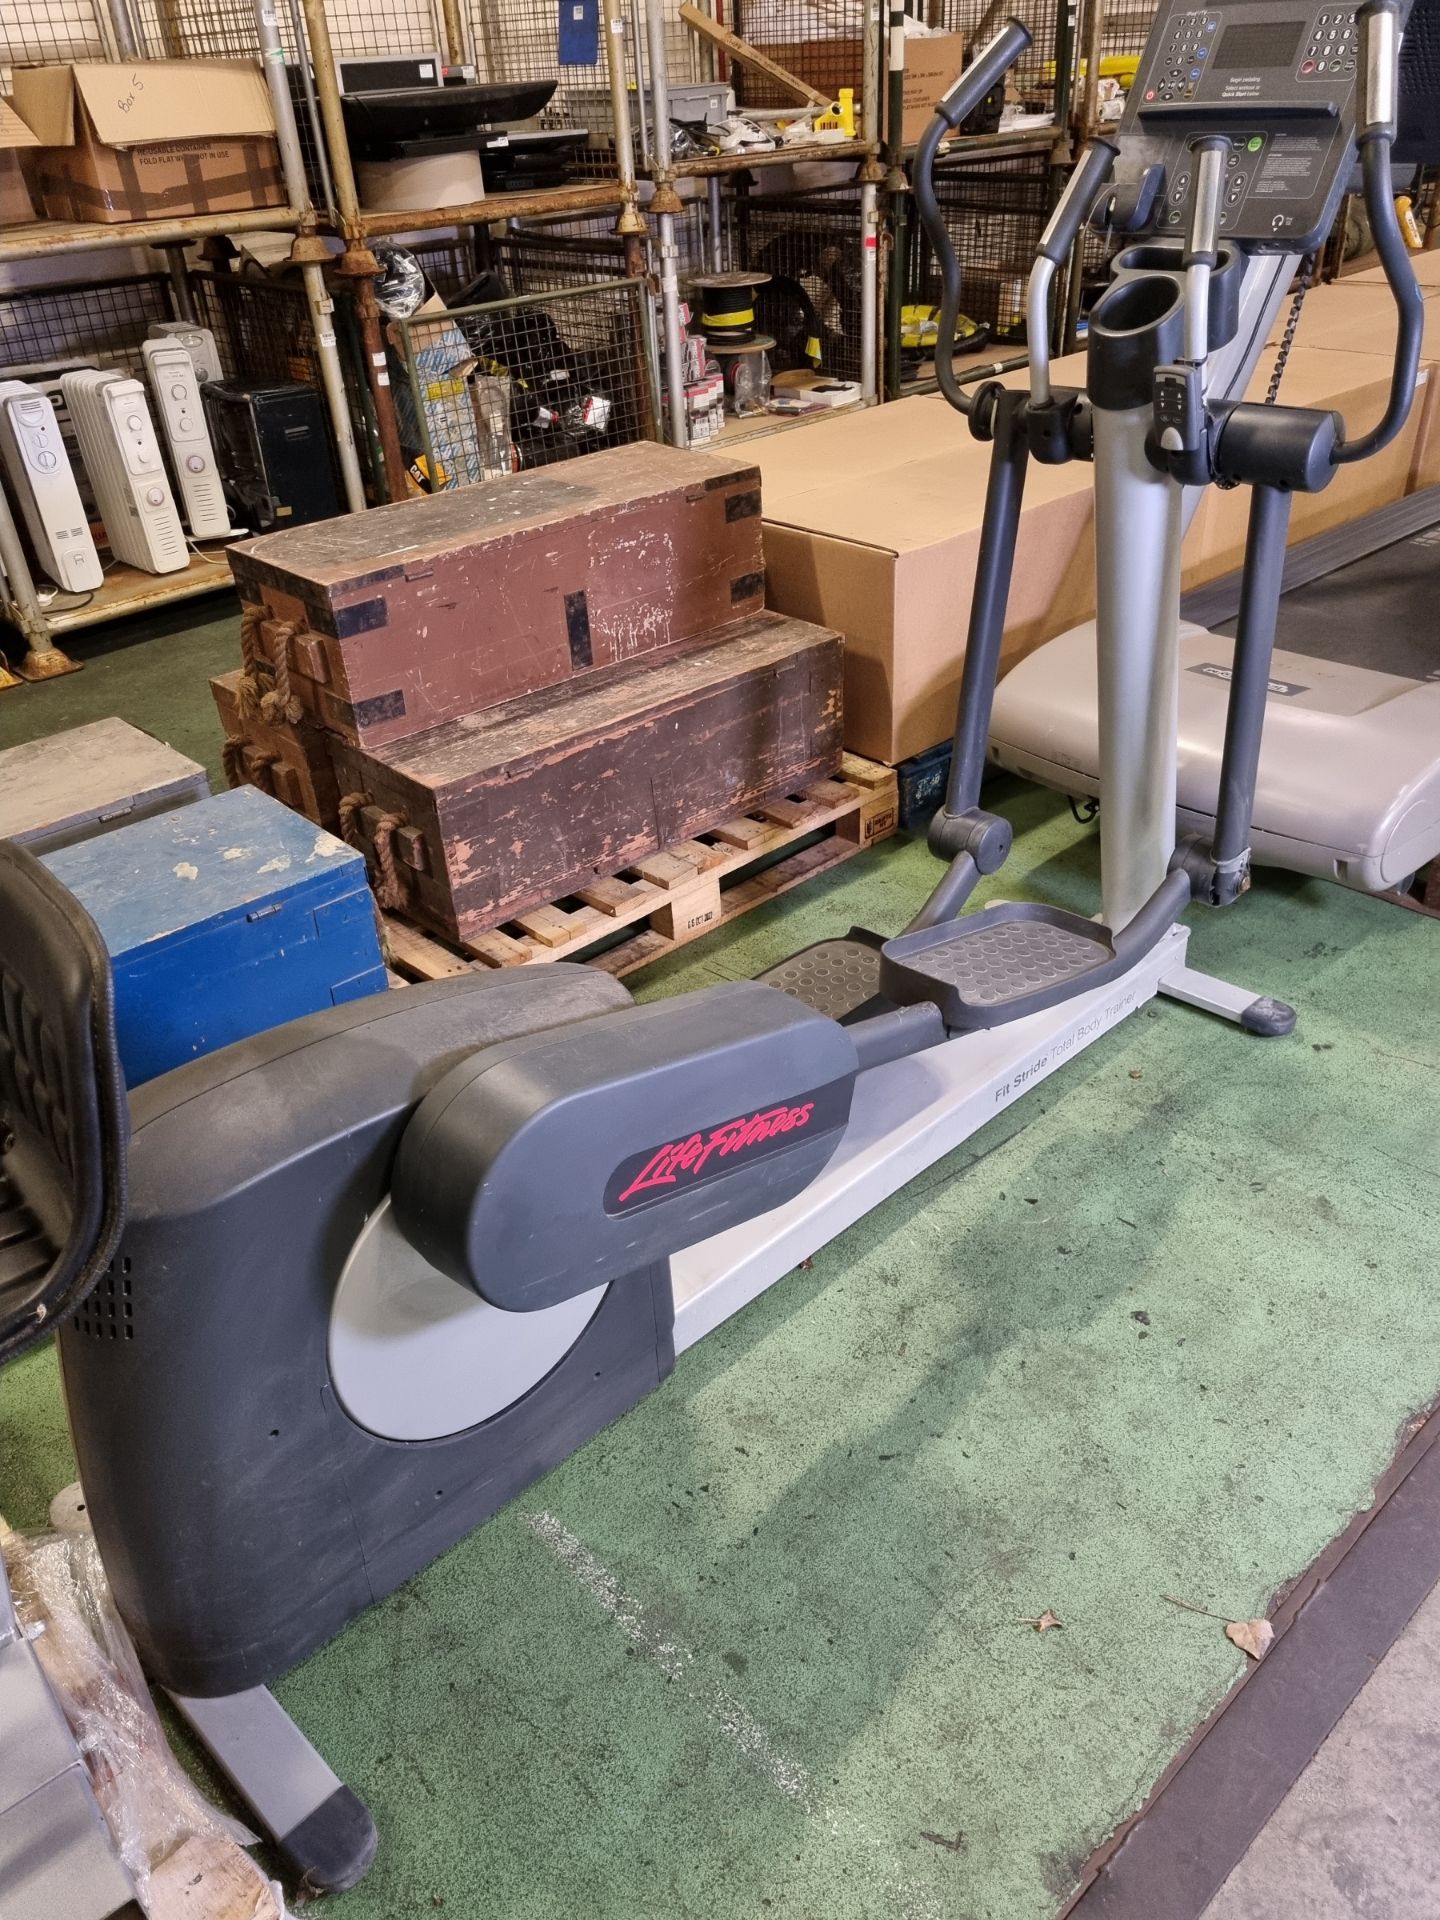 Life Fitness Fit Stride elliptical cross trainer - L 2100 x W 800 x H 1600mm - DAMAGE AND RUSTING - Image 6 of 9